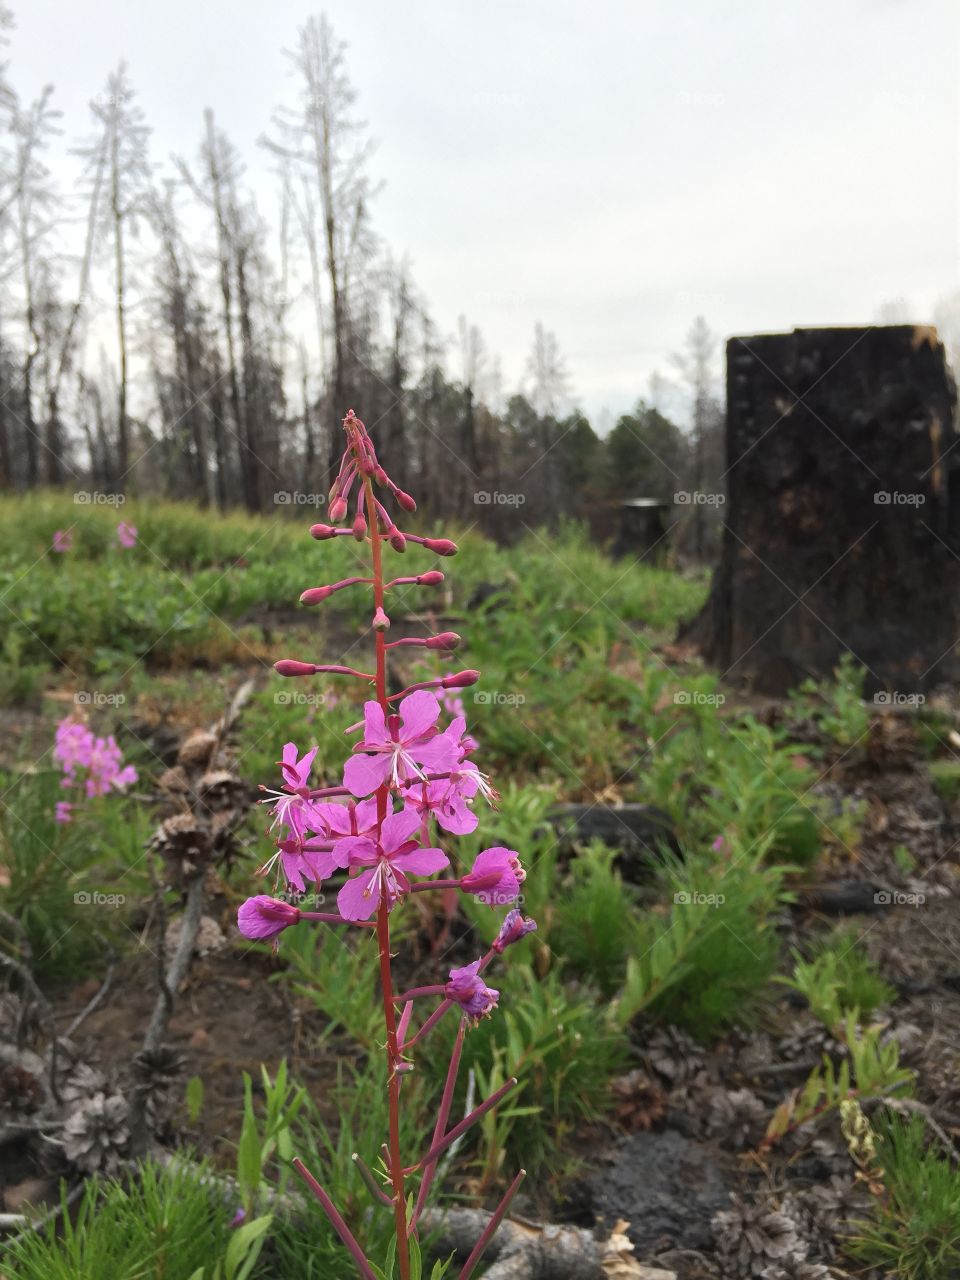 Fireweed in Bloom. Pink fireweed in full bloom at the site of a wildfire